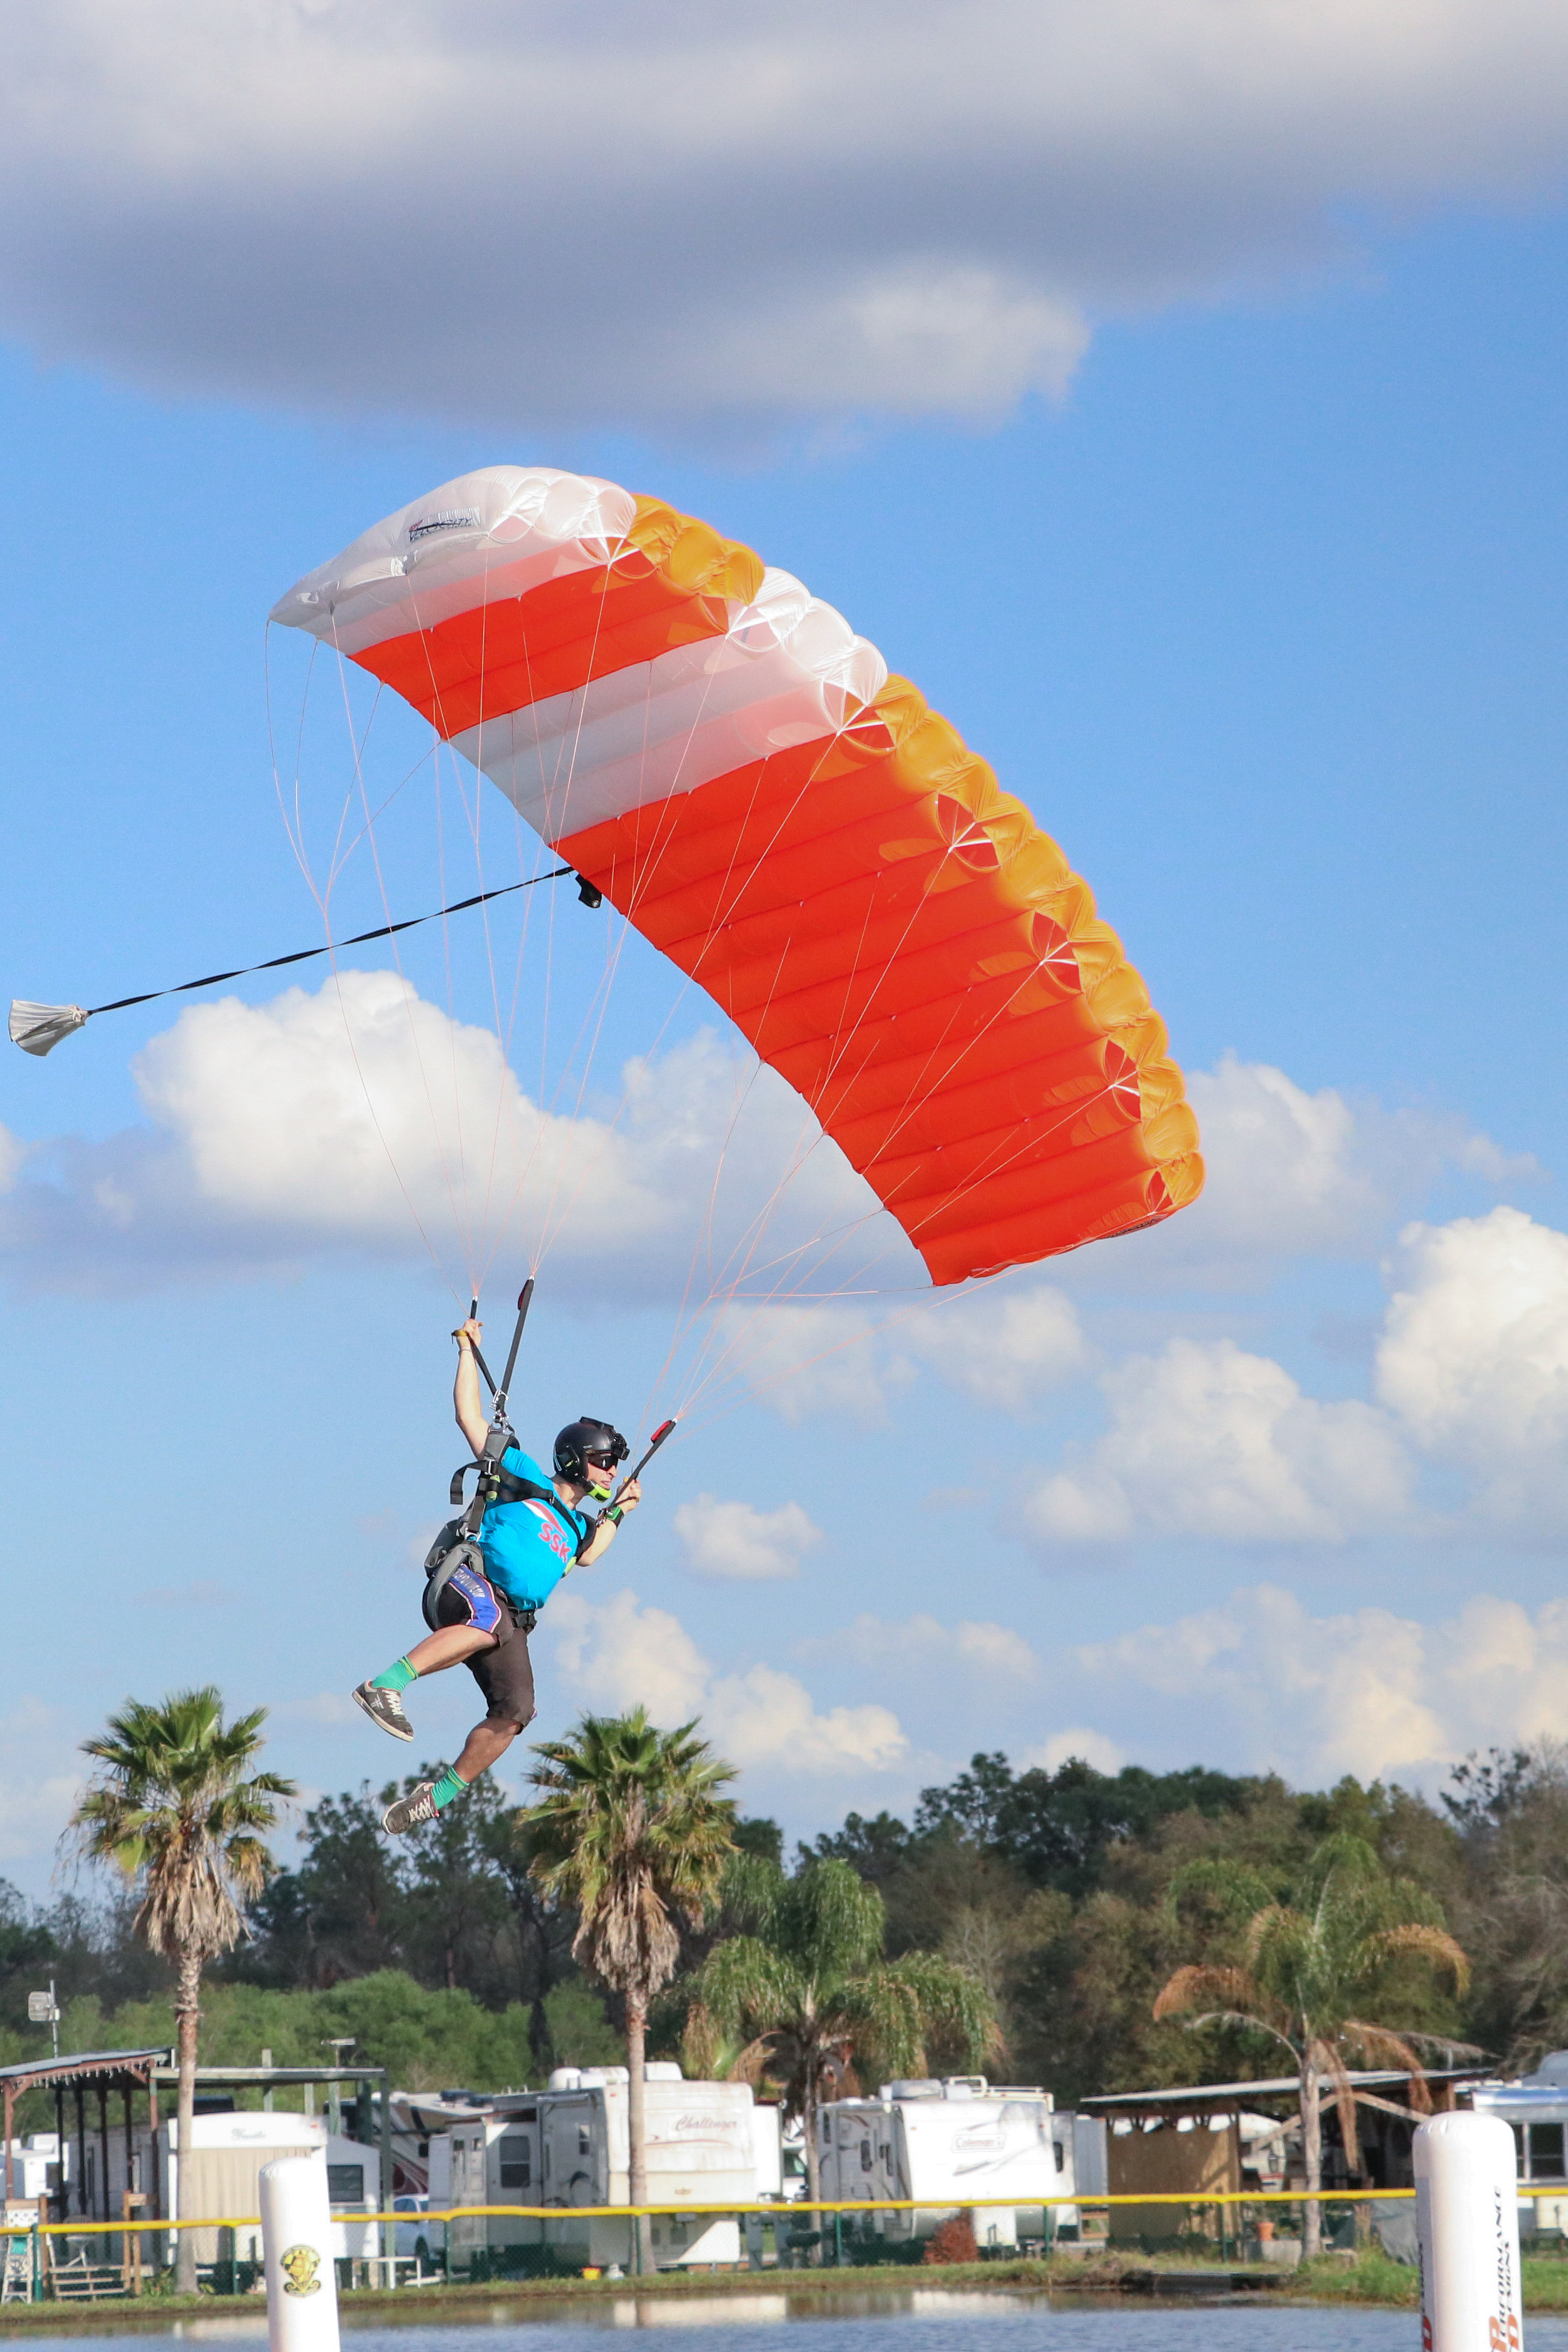 High-Kick-Photography-Skydiving-Canopy-Piloting-Swoop-High-Performance-Parachute-Skydive-City-Zephyrhills-ZHills-Florida-Sports-Active-Competition-LR-14.jpg